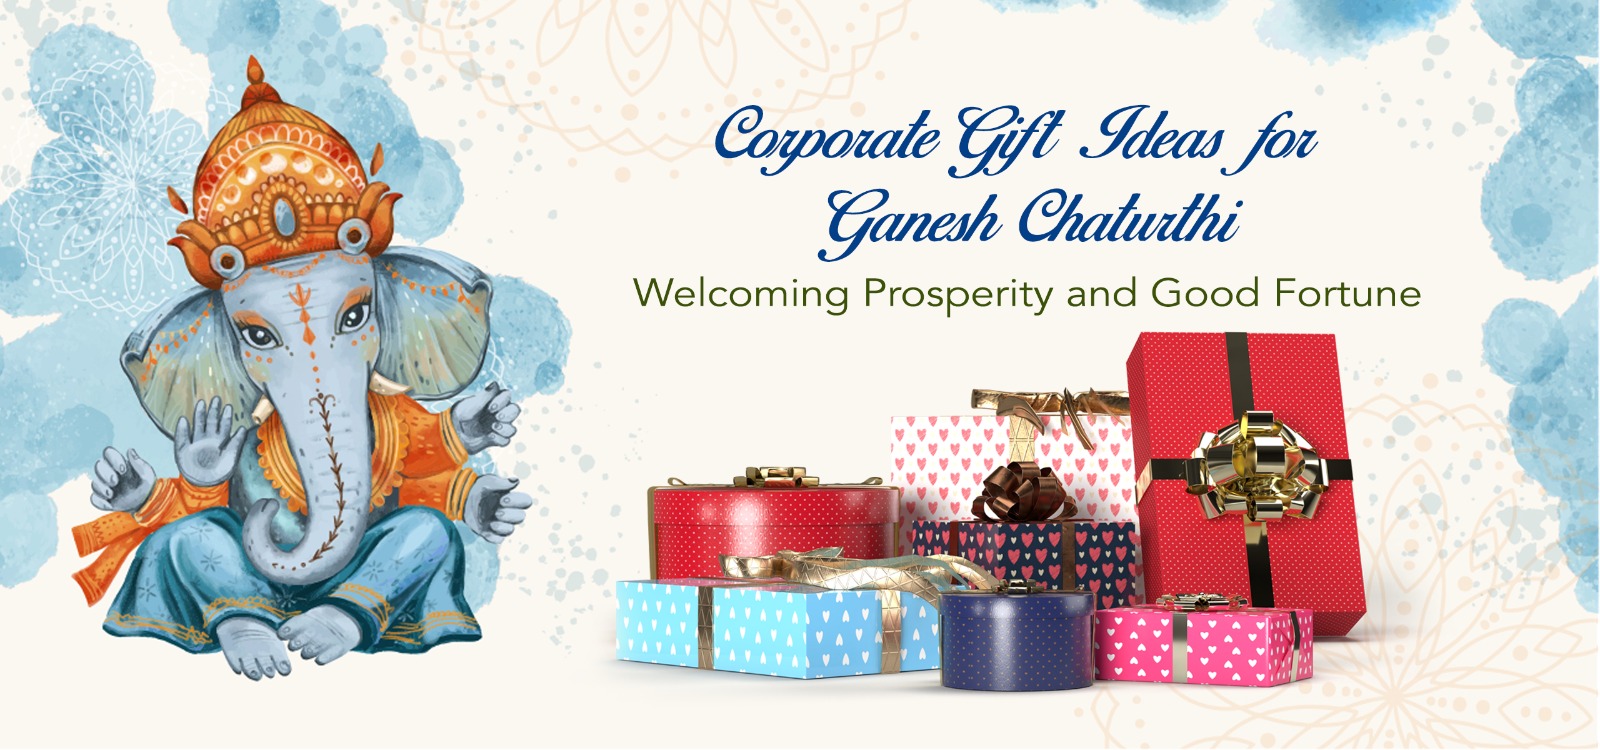 Corporate gift ideas for Ganesh Chaturthi: Welcoming prosperity and good fortune